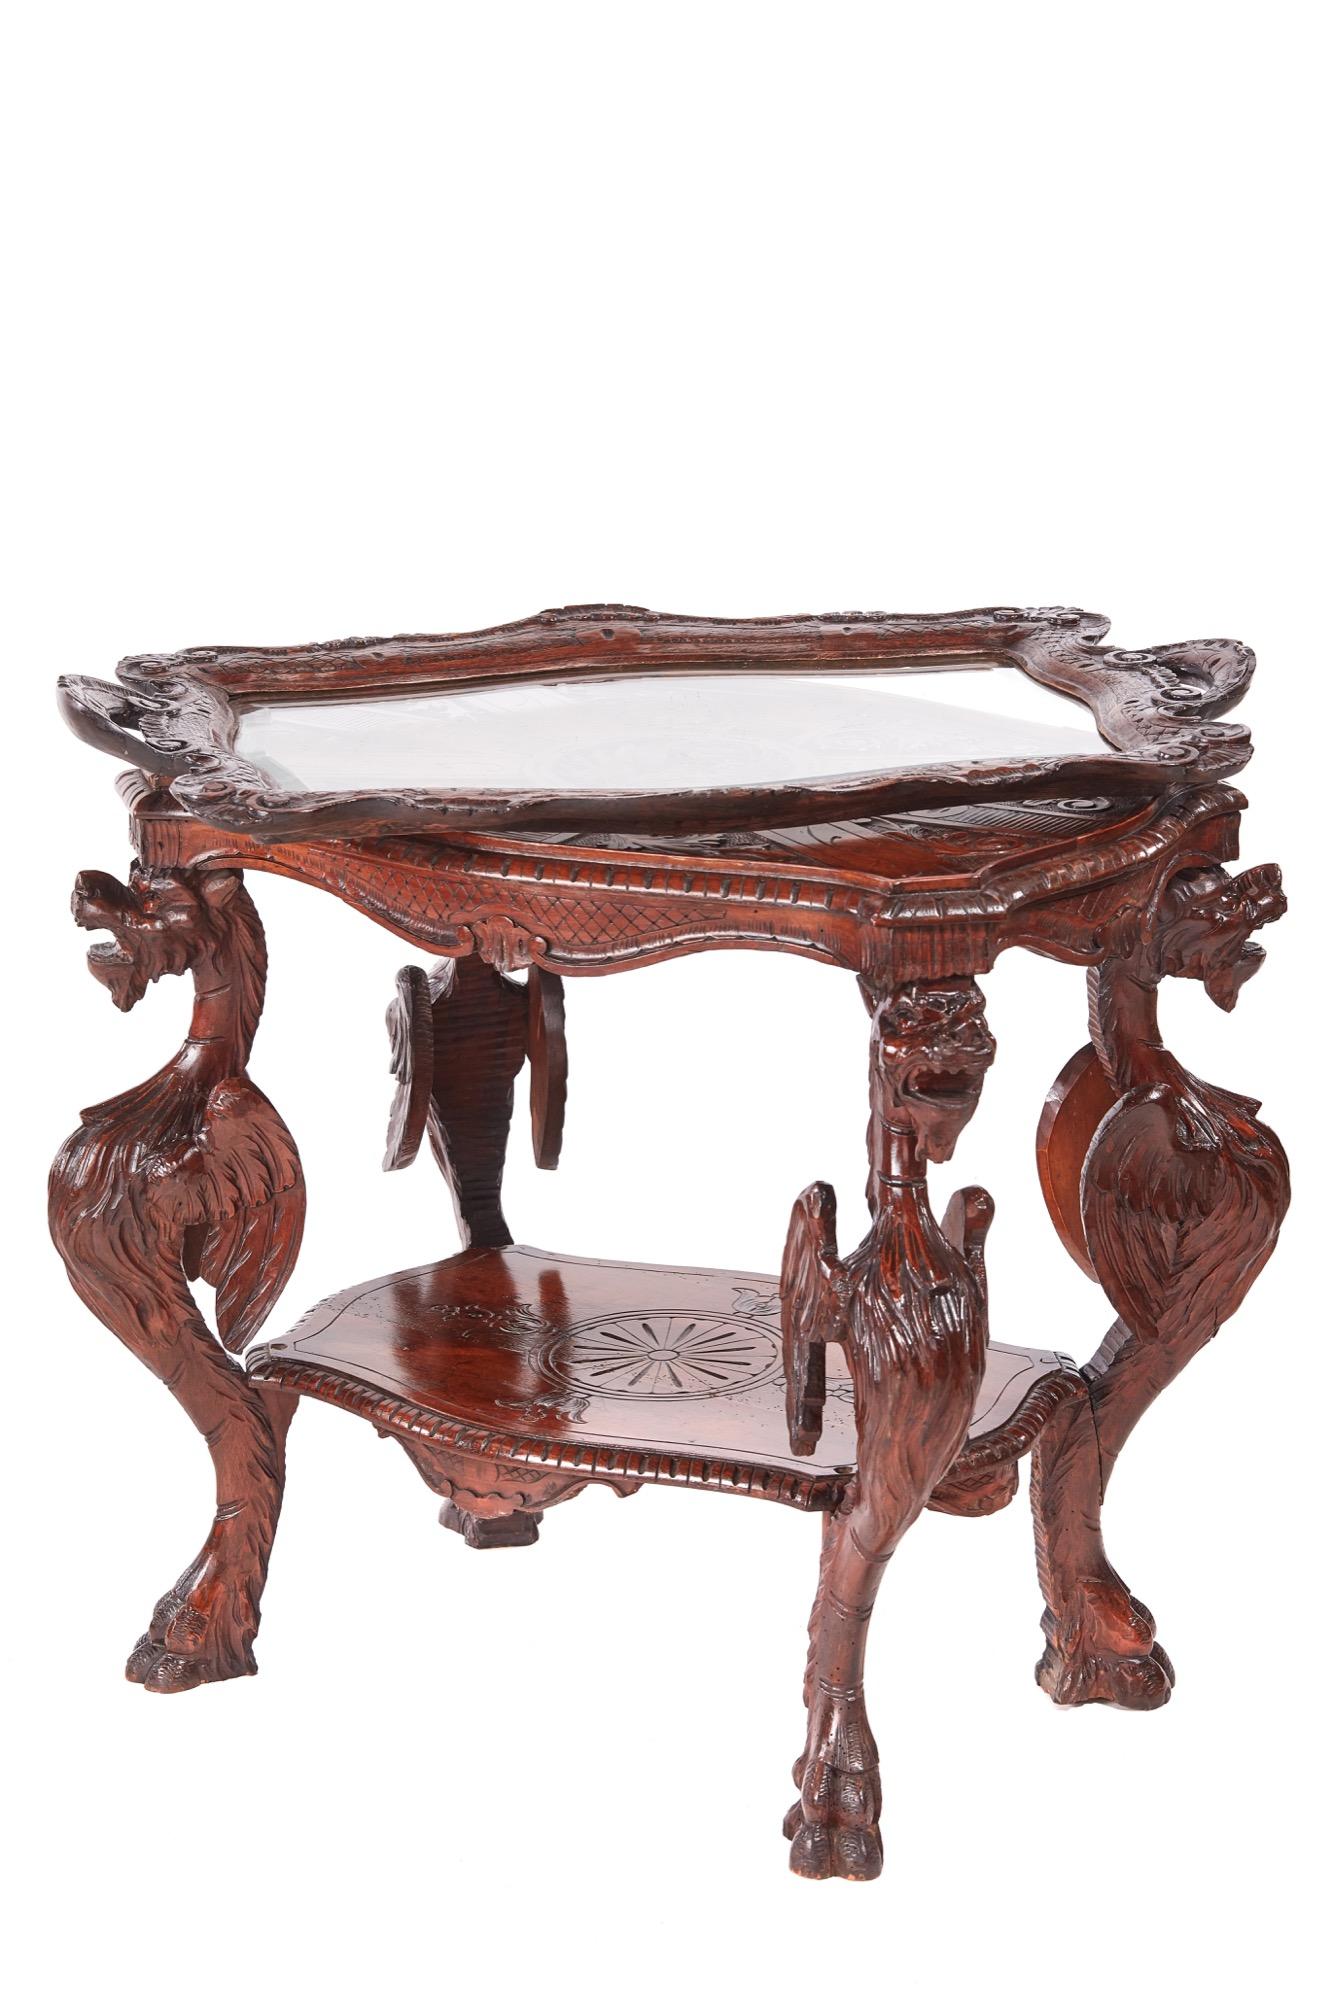 This is a splendid unusual antique carved oak Italian centre table having a serpentine carved top with lion decoration. It has a fitted removable tray with a glass top, the upper tier raised on four strikingly carved caryatid dragon legs on paw feet